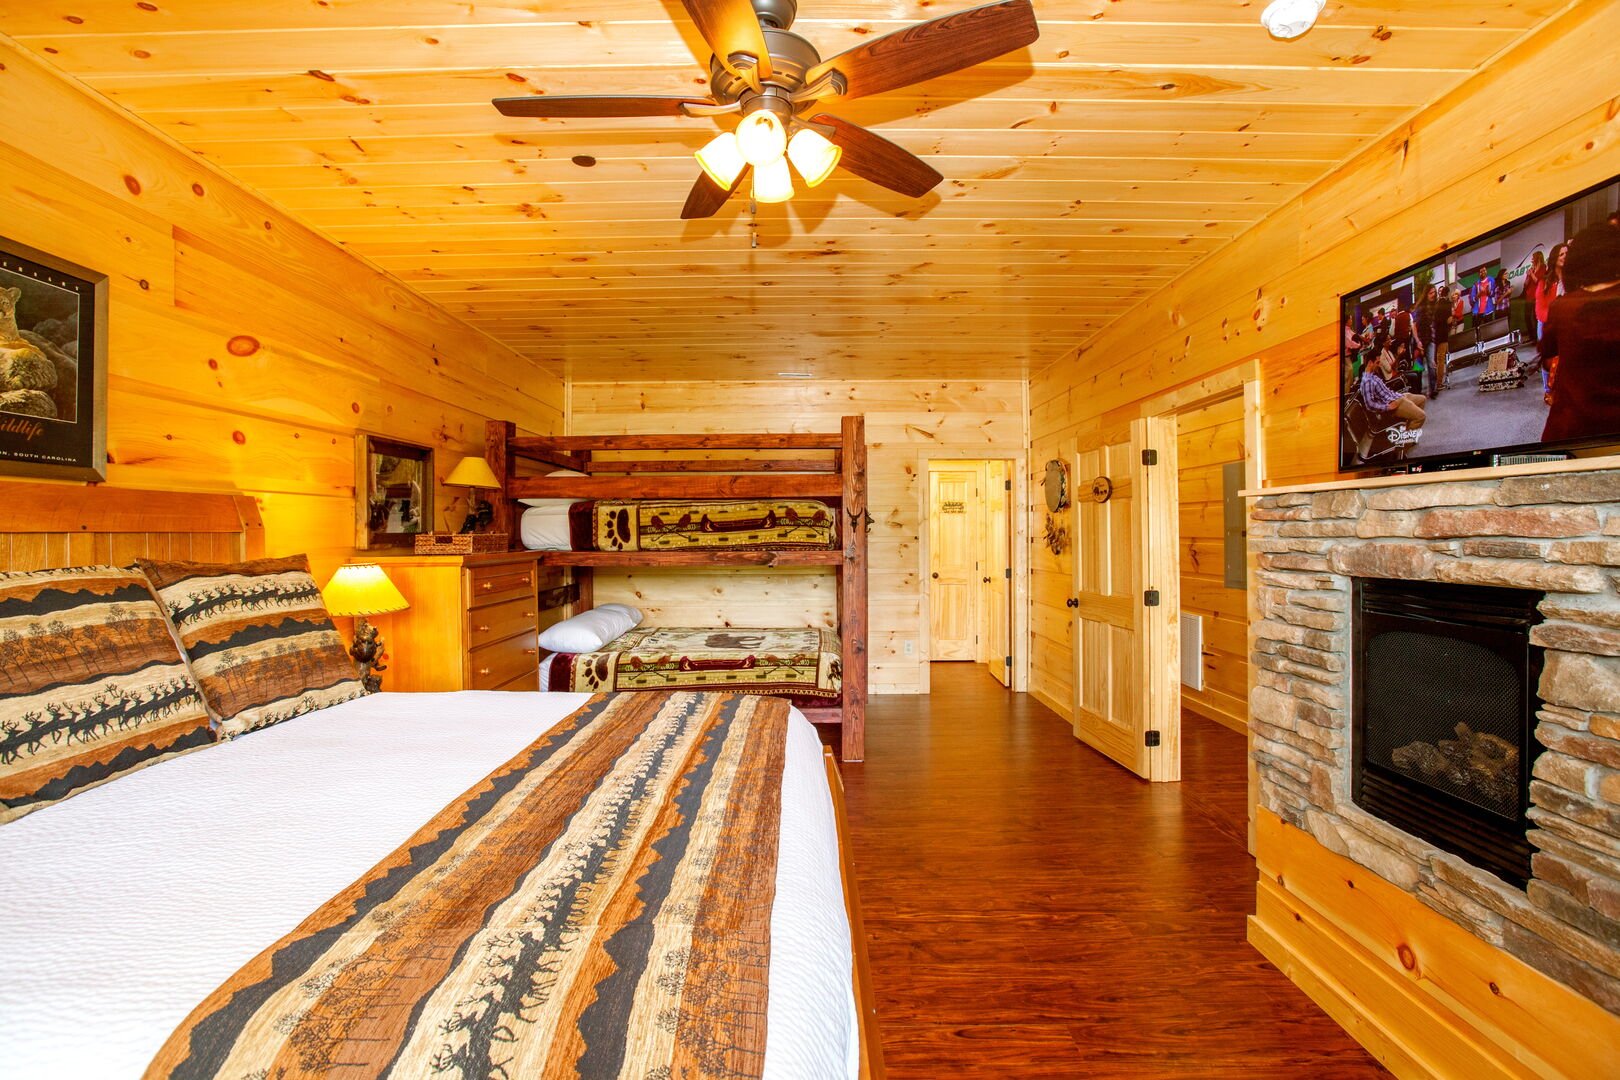 Bunk room with large bed, bunk-bed, and fireplace with TV above.